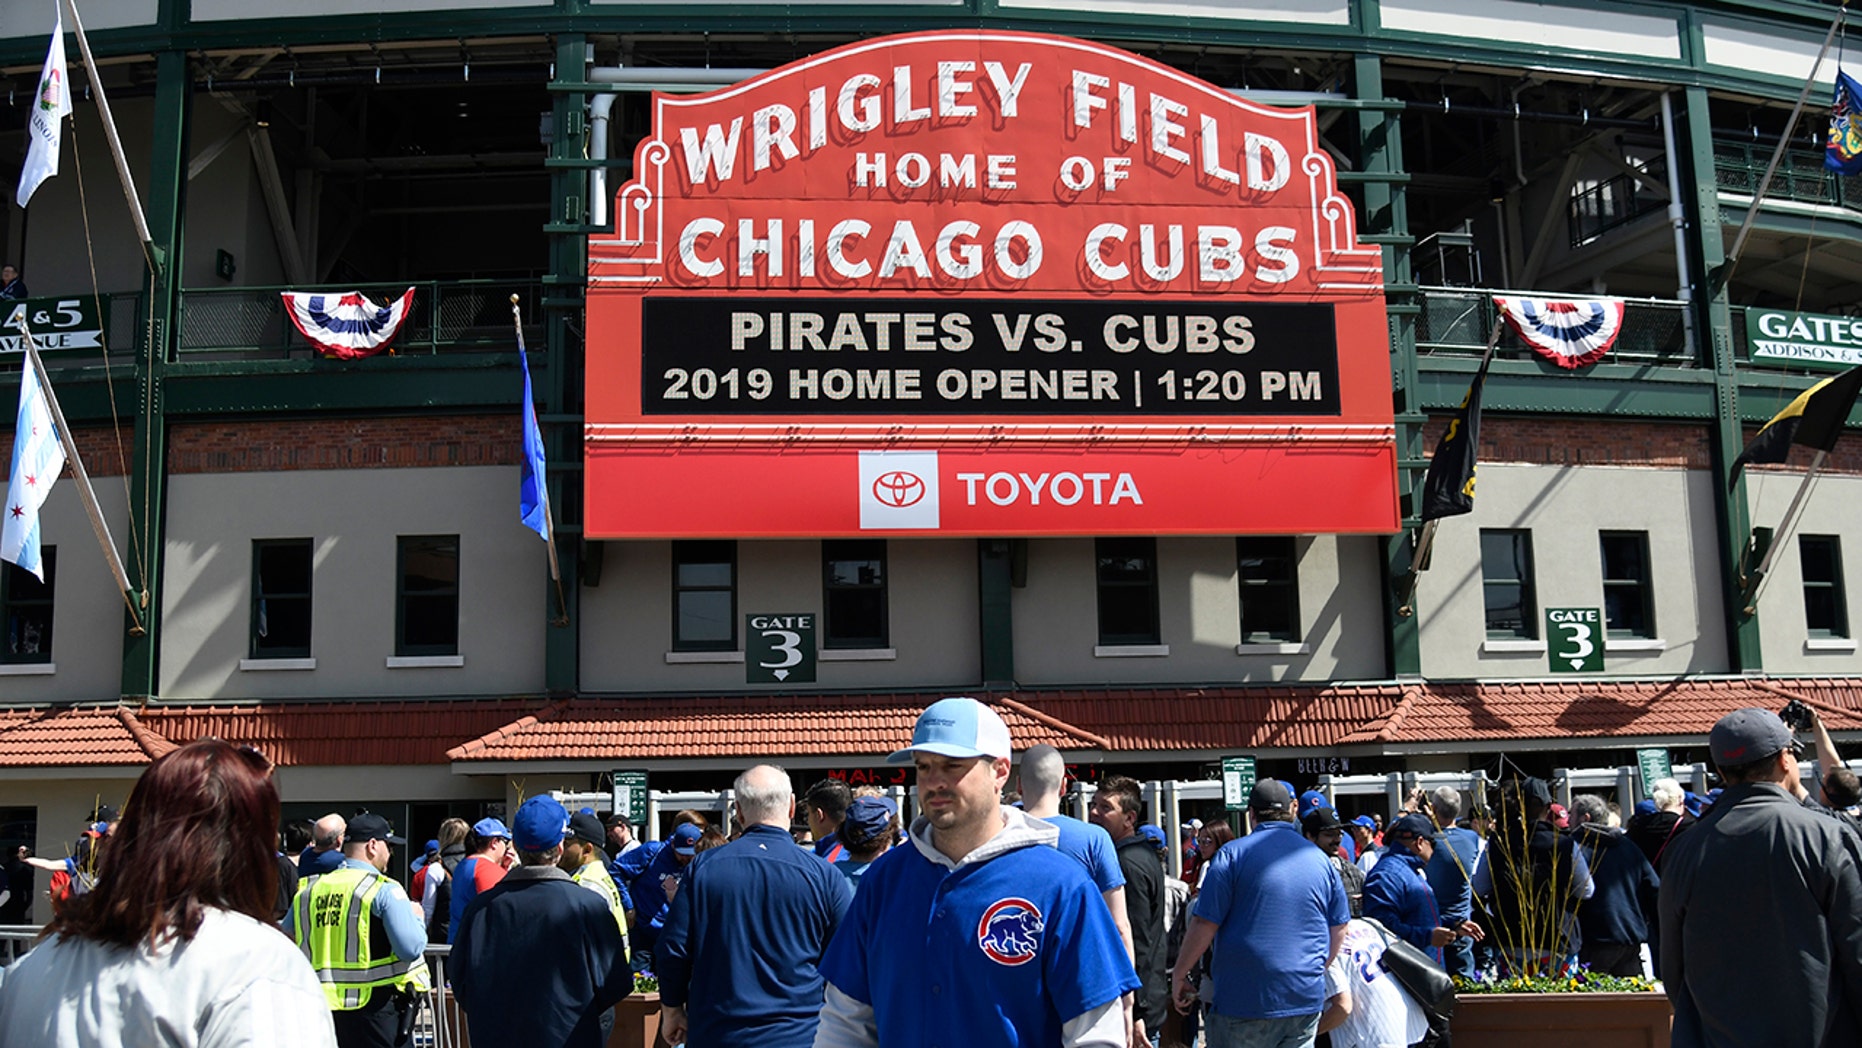 Chicago Cubs remove press box image that read 'No Women Admitted' after